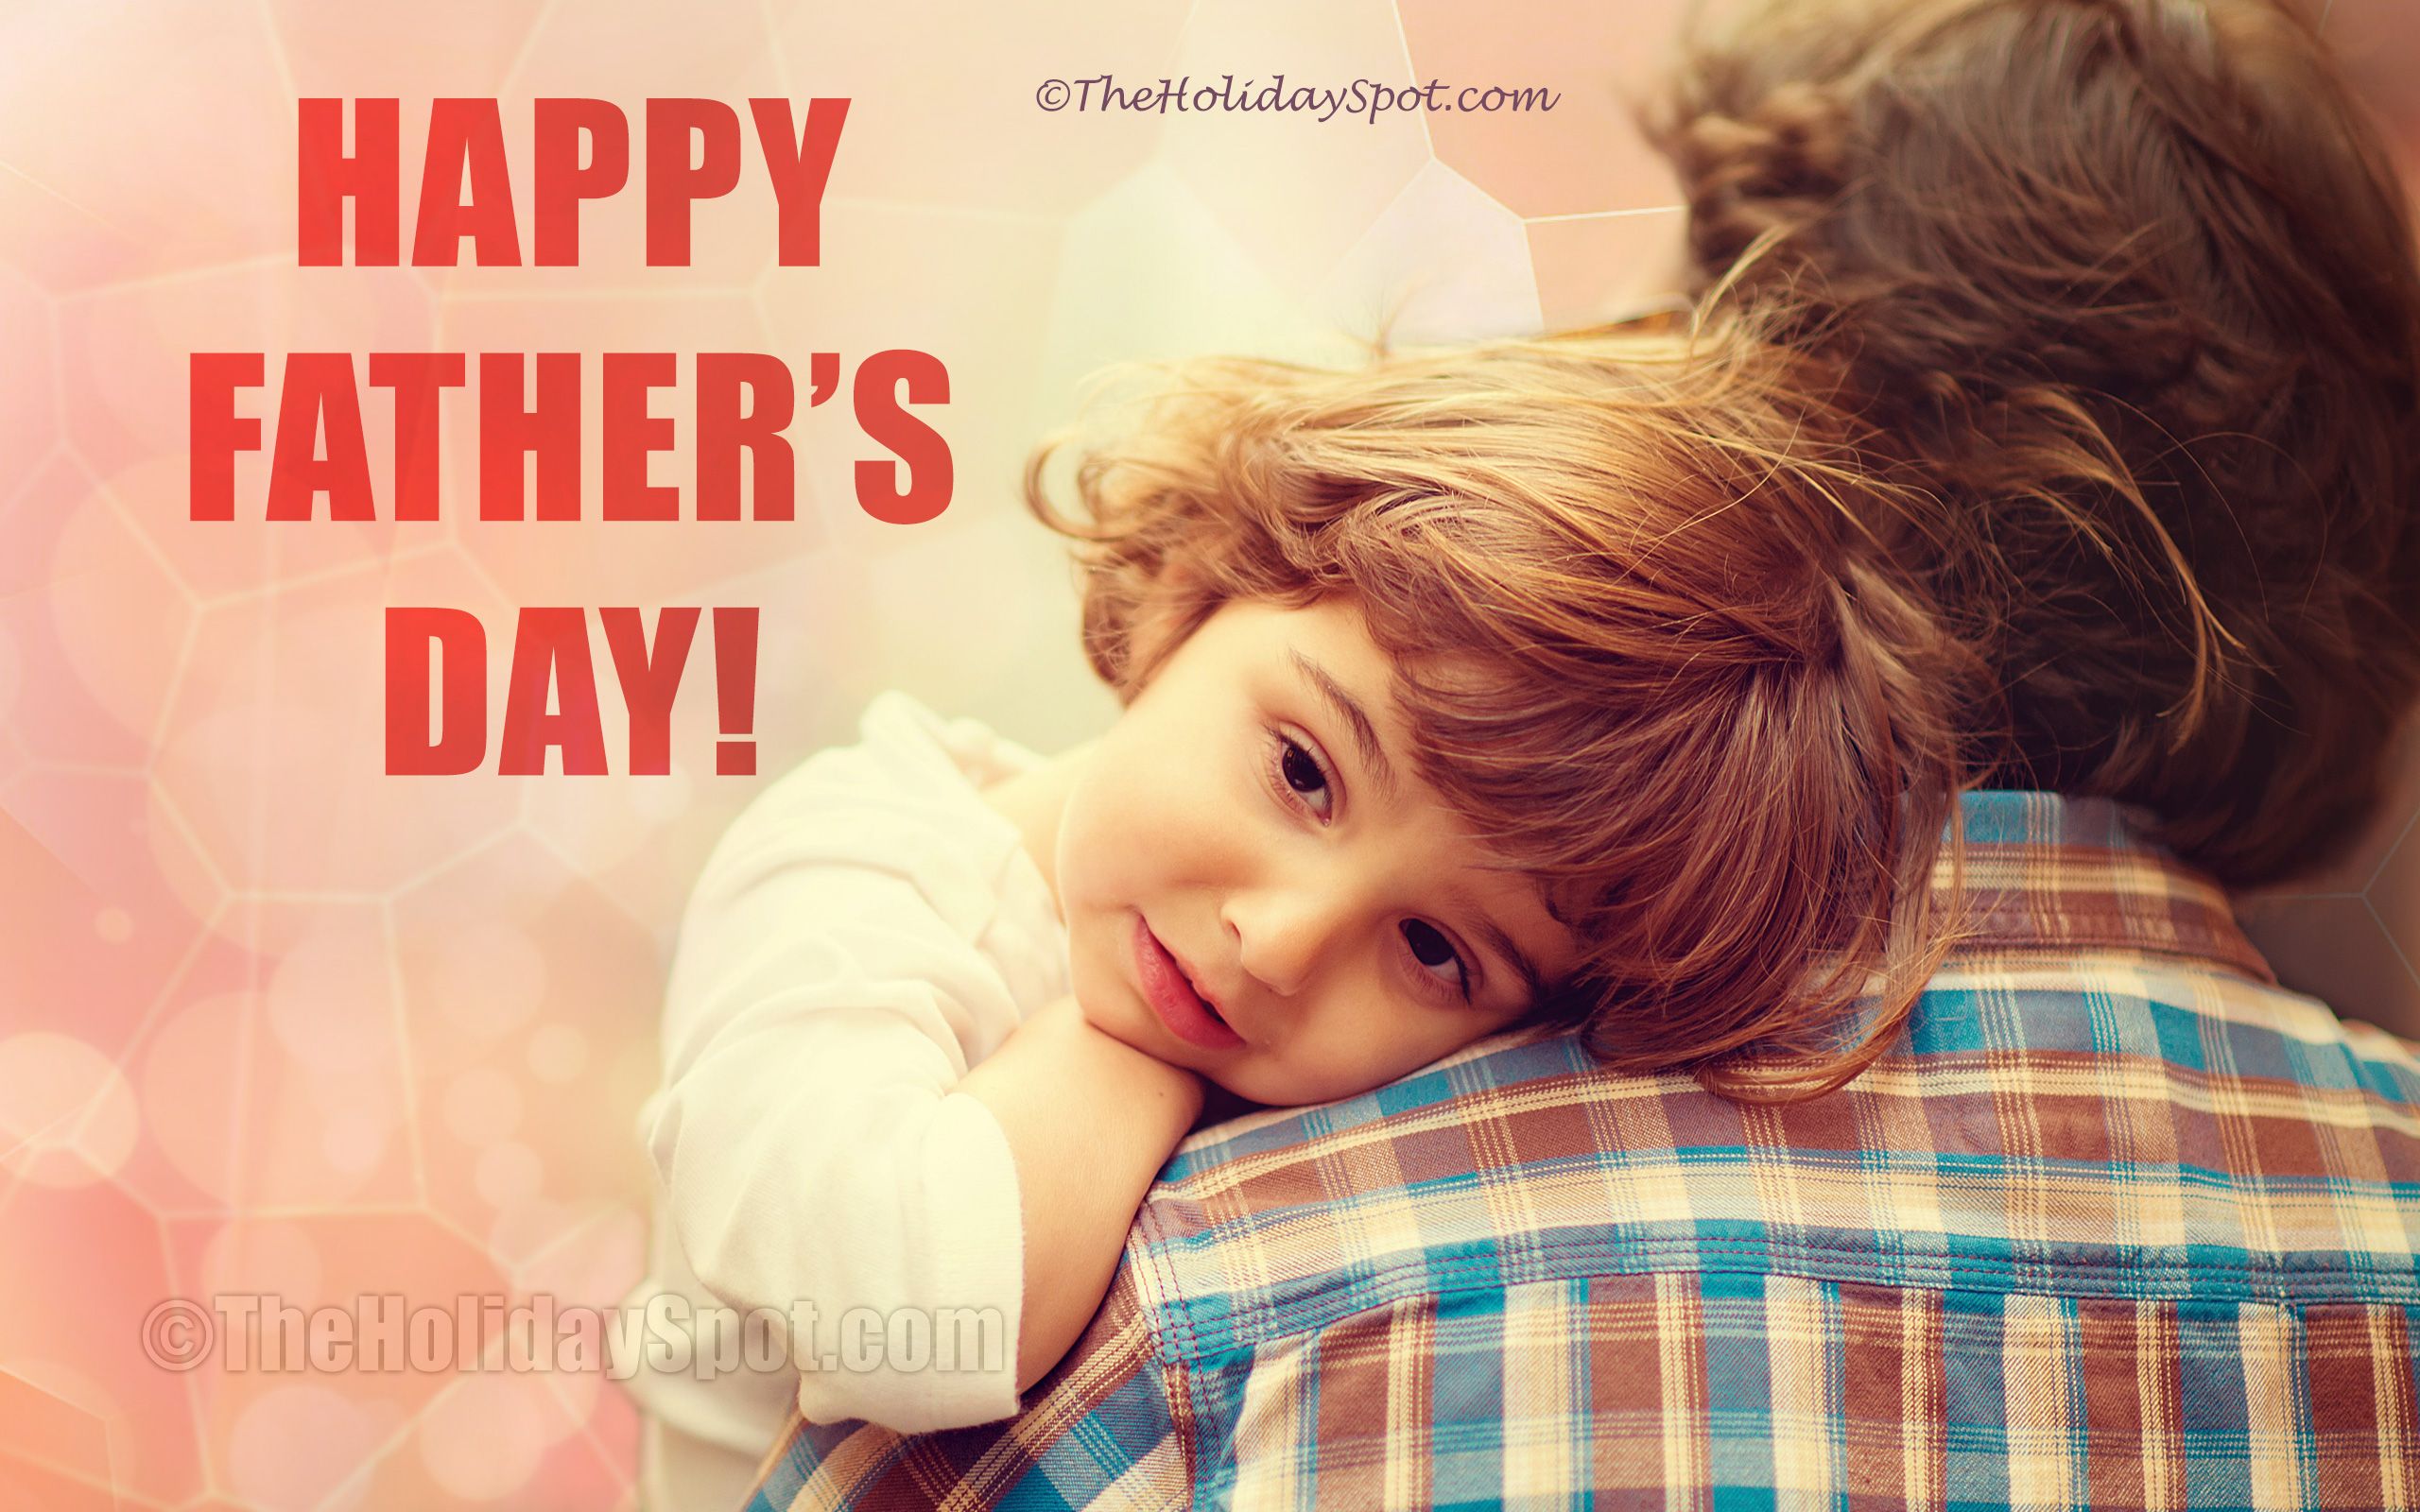 Fathers Day Wallpaper. Fathers Day Image 2022 HD. Happy Fathers Day Image